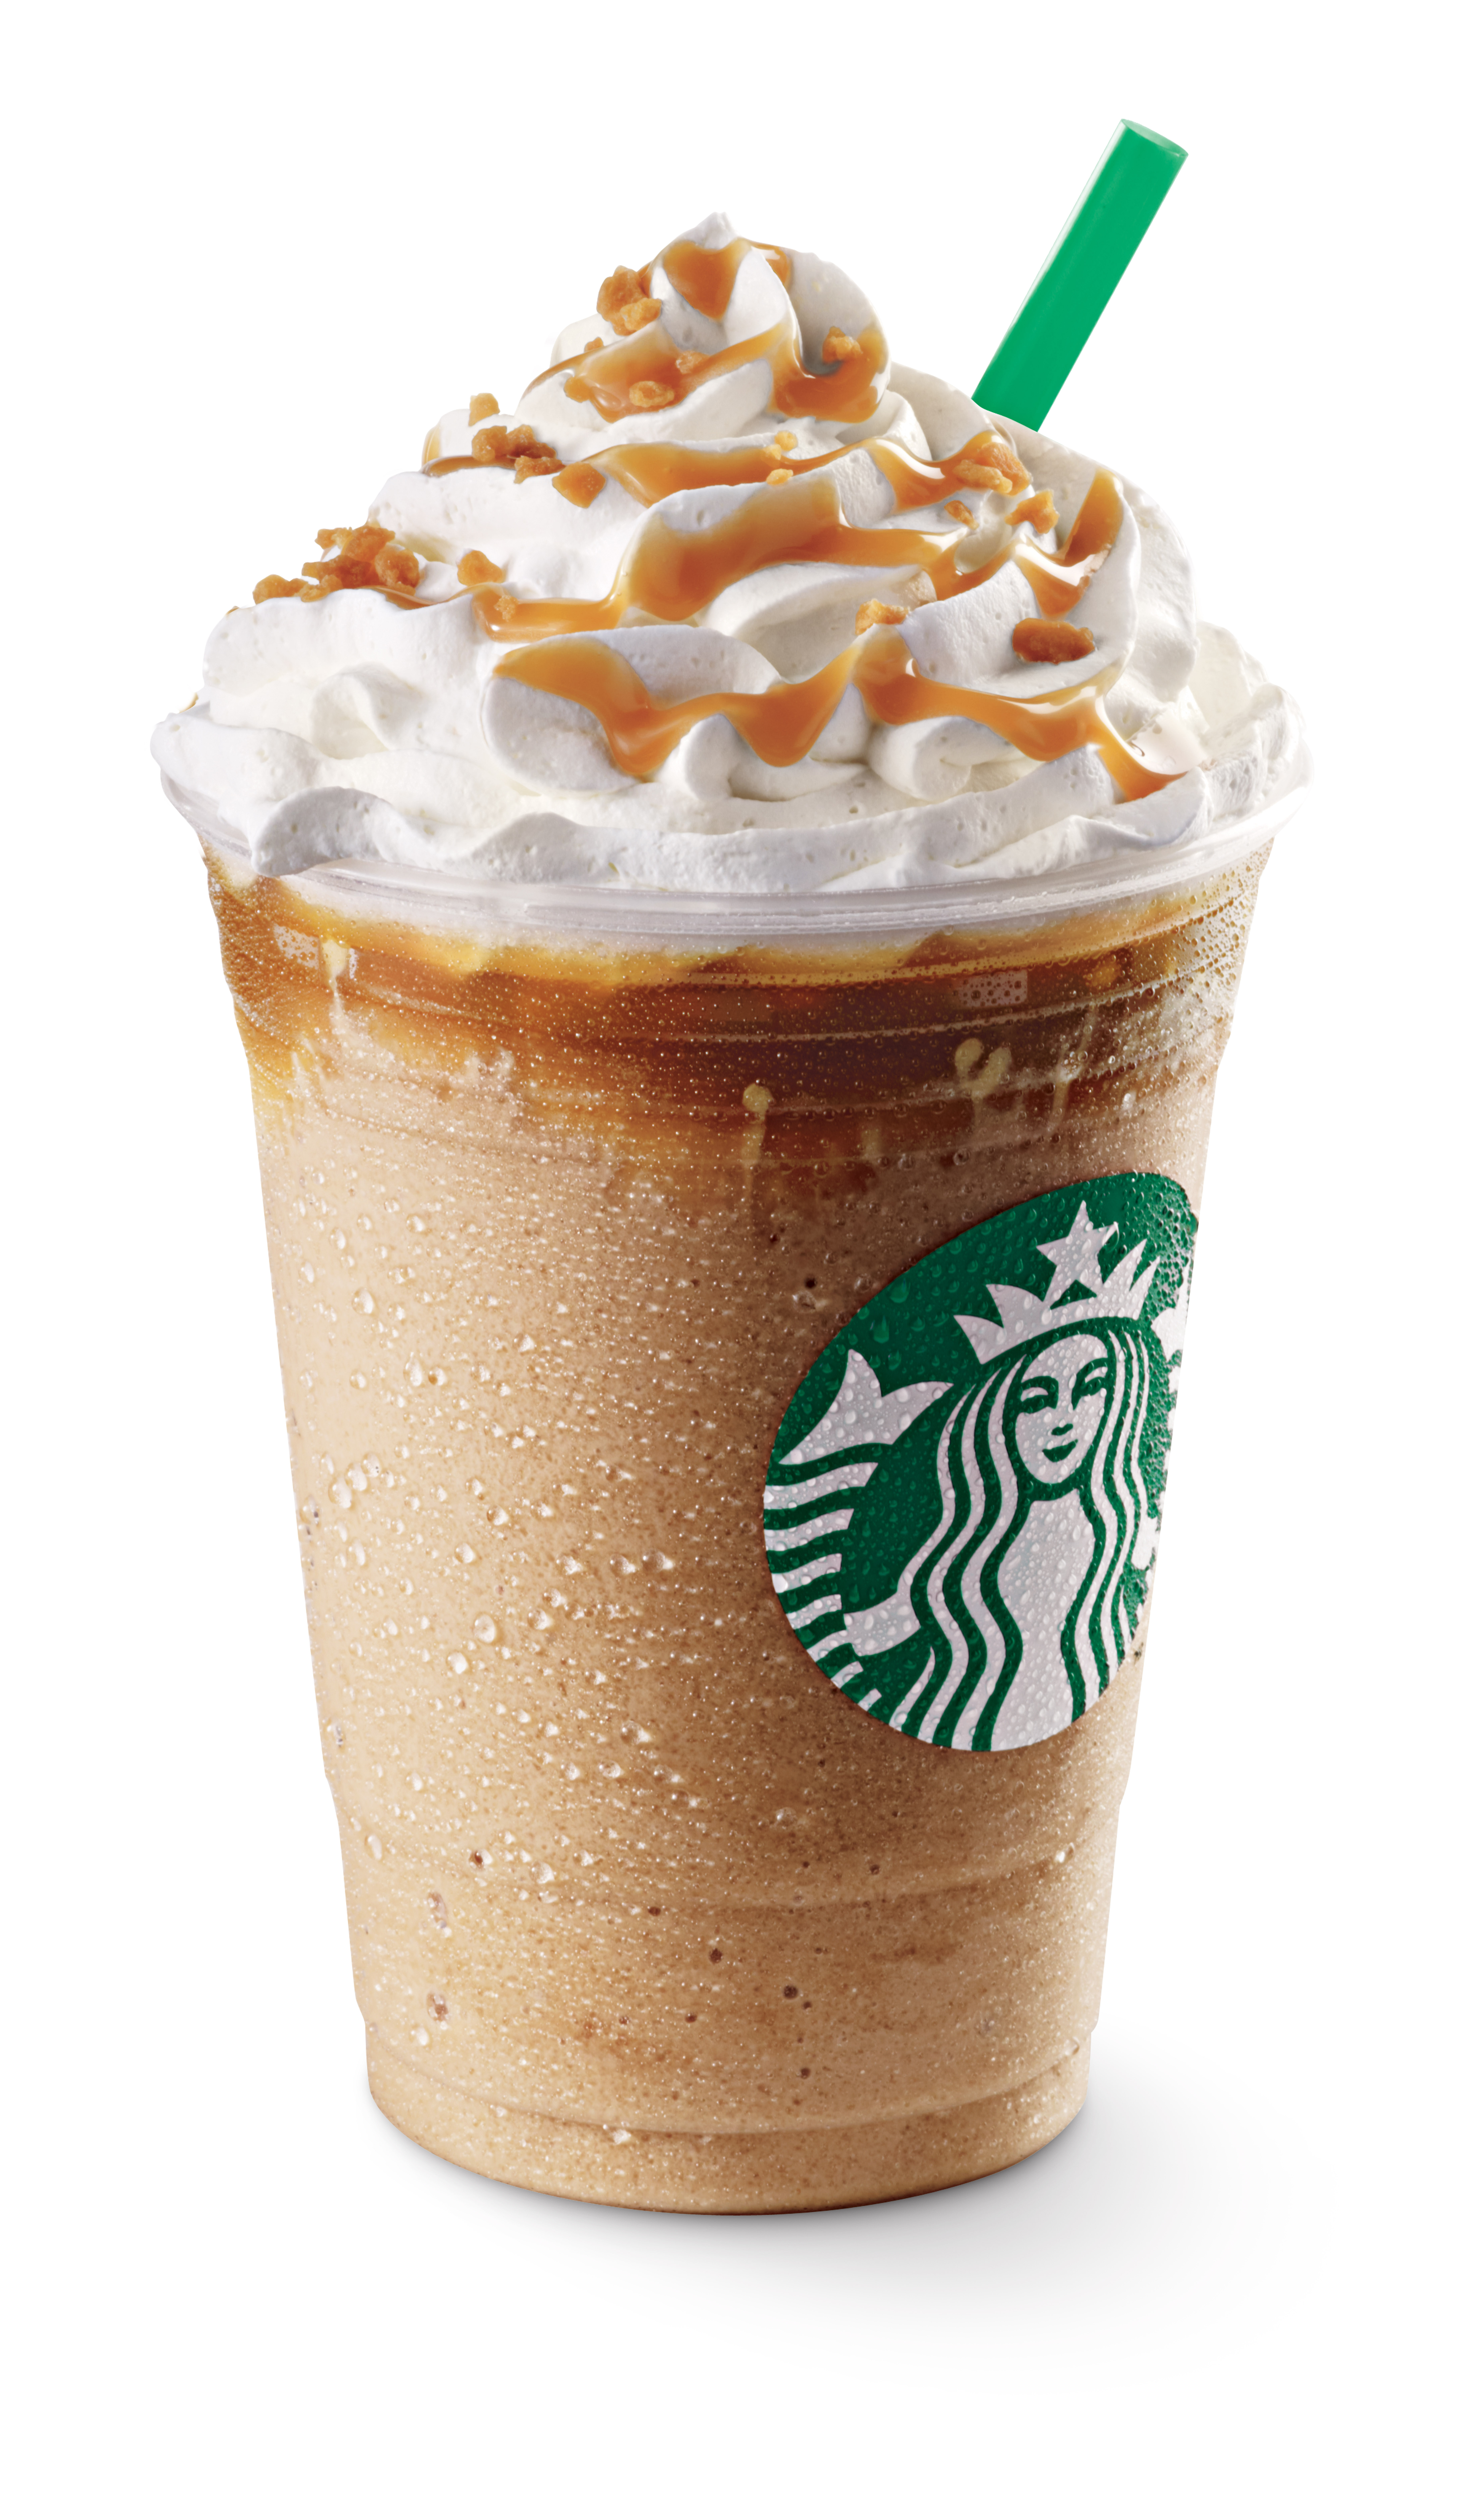 What Are Your Favorite Starbucks Drinks? - Page 2